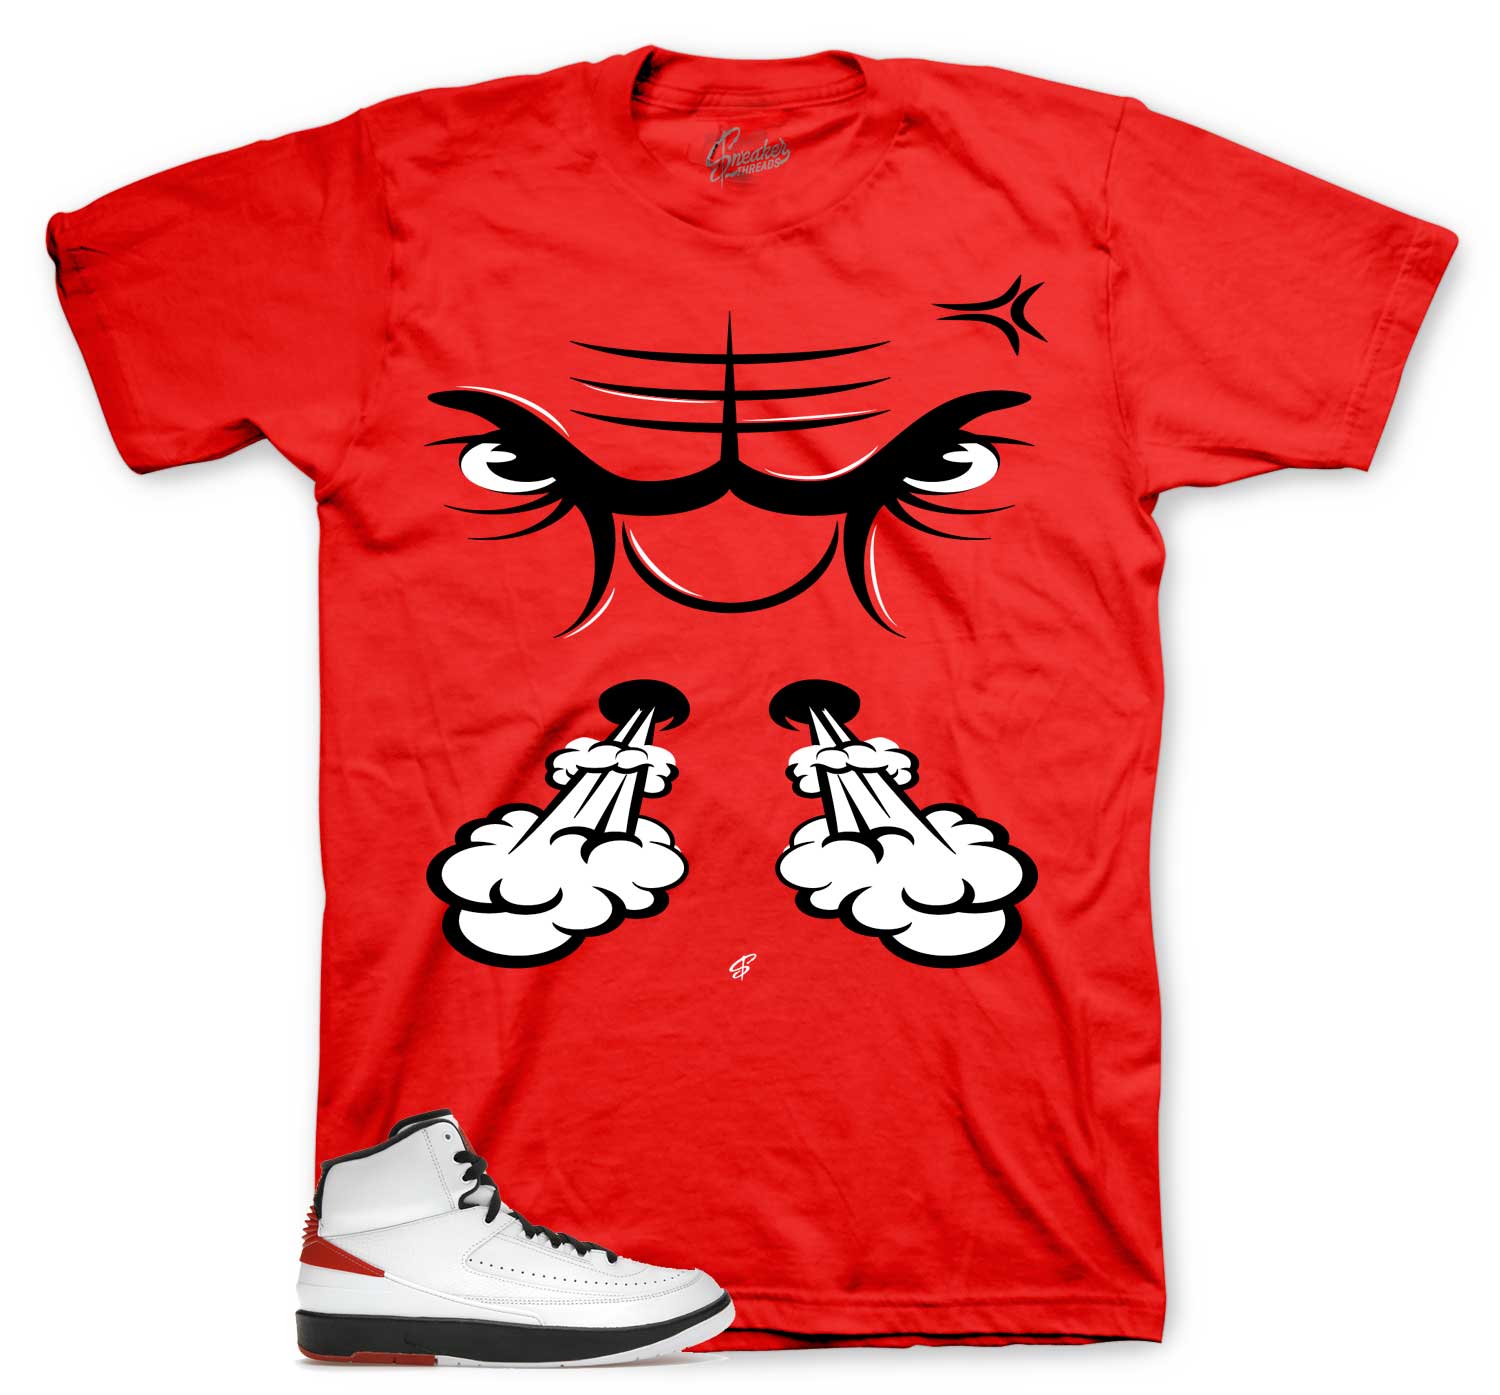 Retro 2 Chicago Shirt - Raging Face - Red